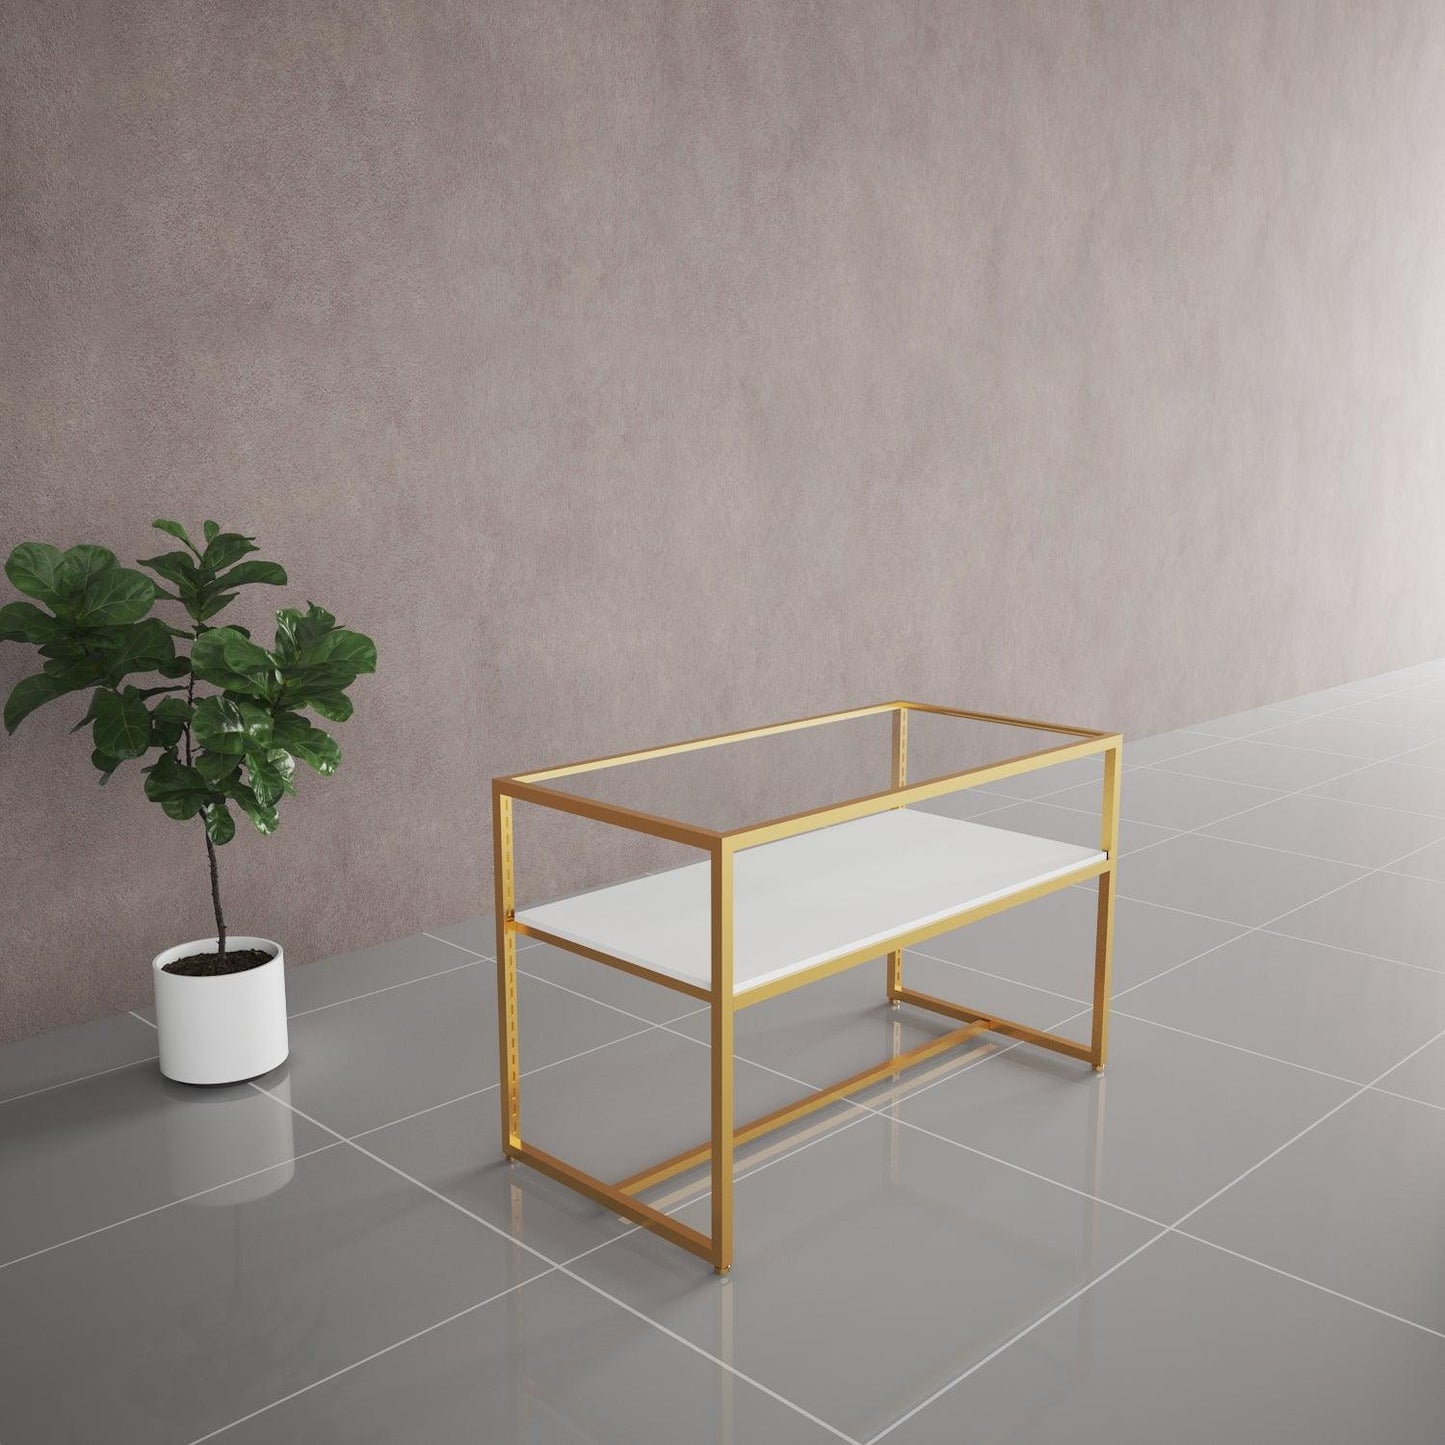 Display Table With Glass Top - Fixturic